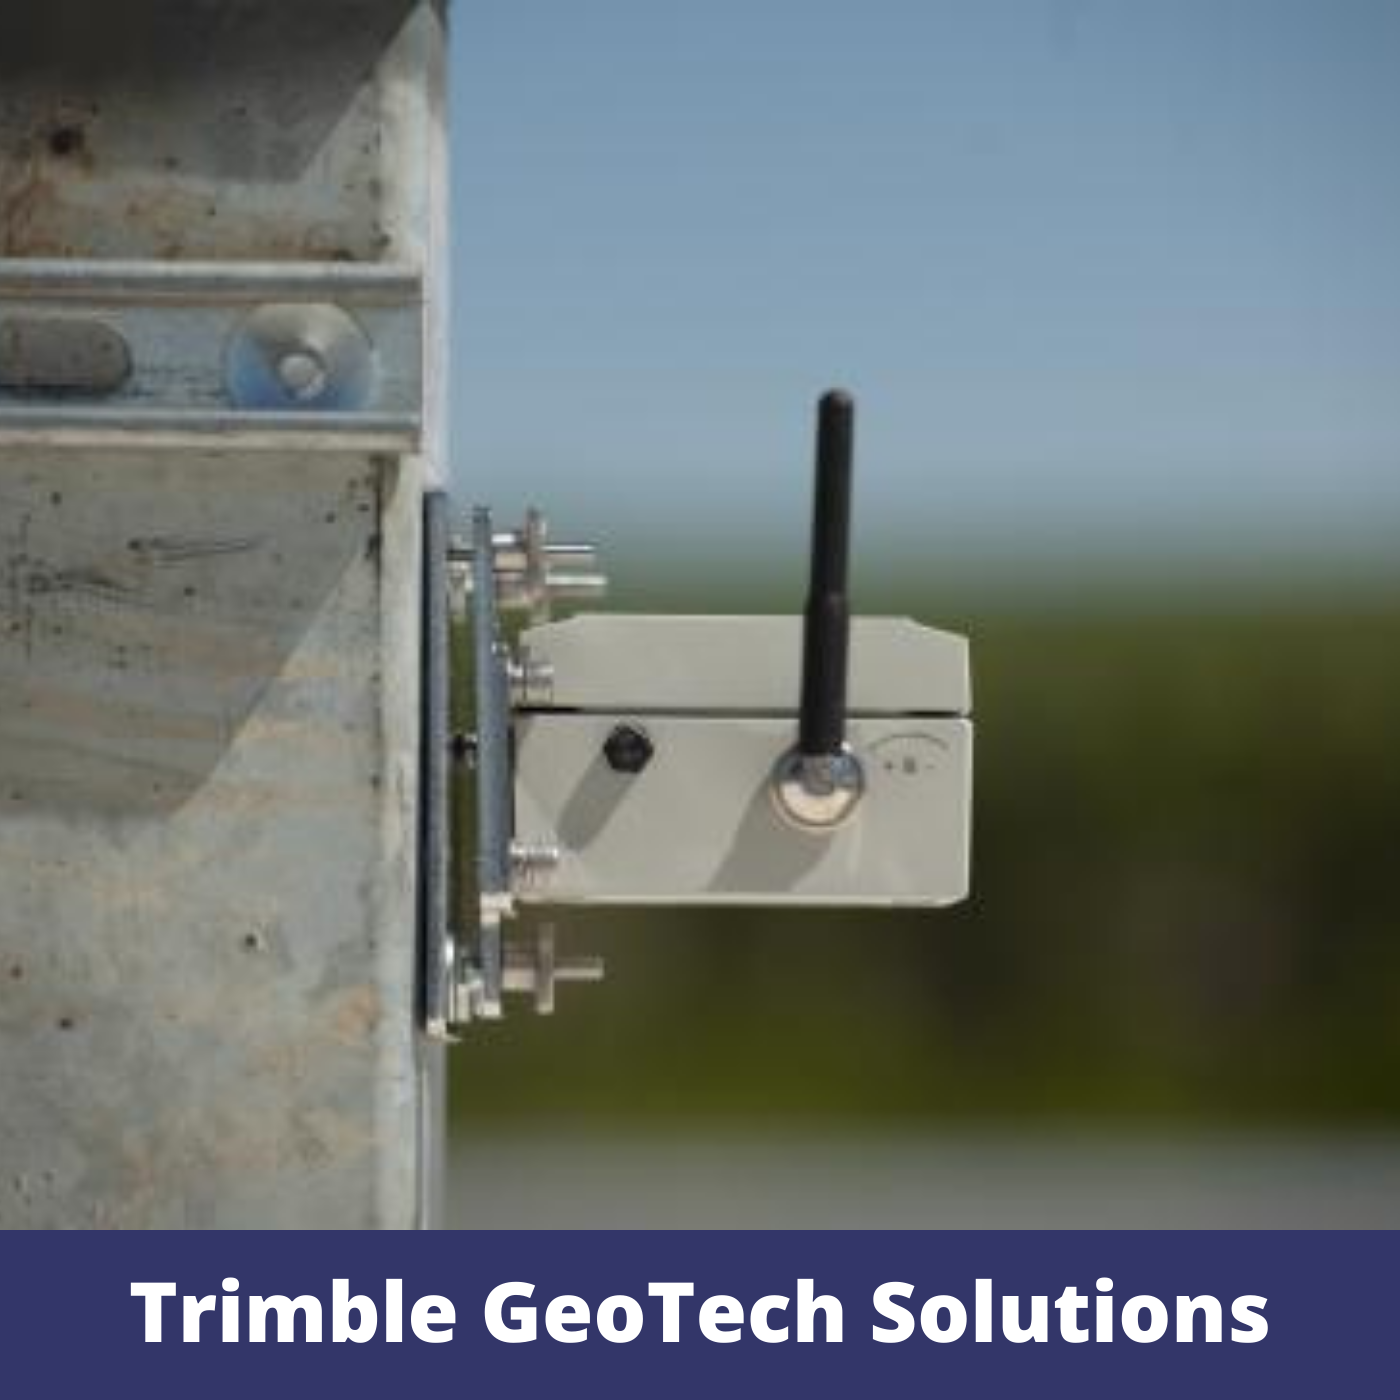 a picture of trimble geotech solutions shows a device attached to a pole